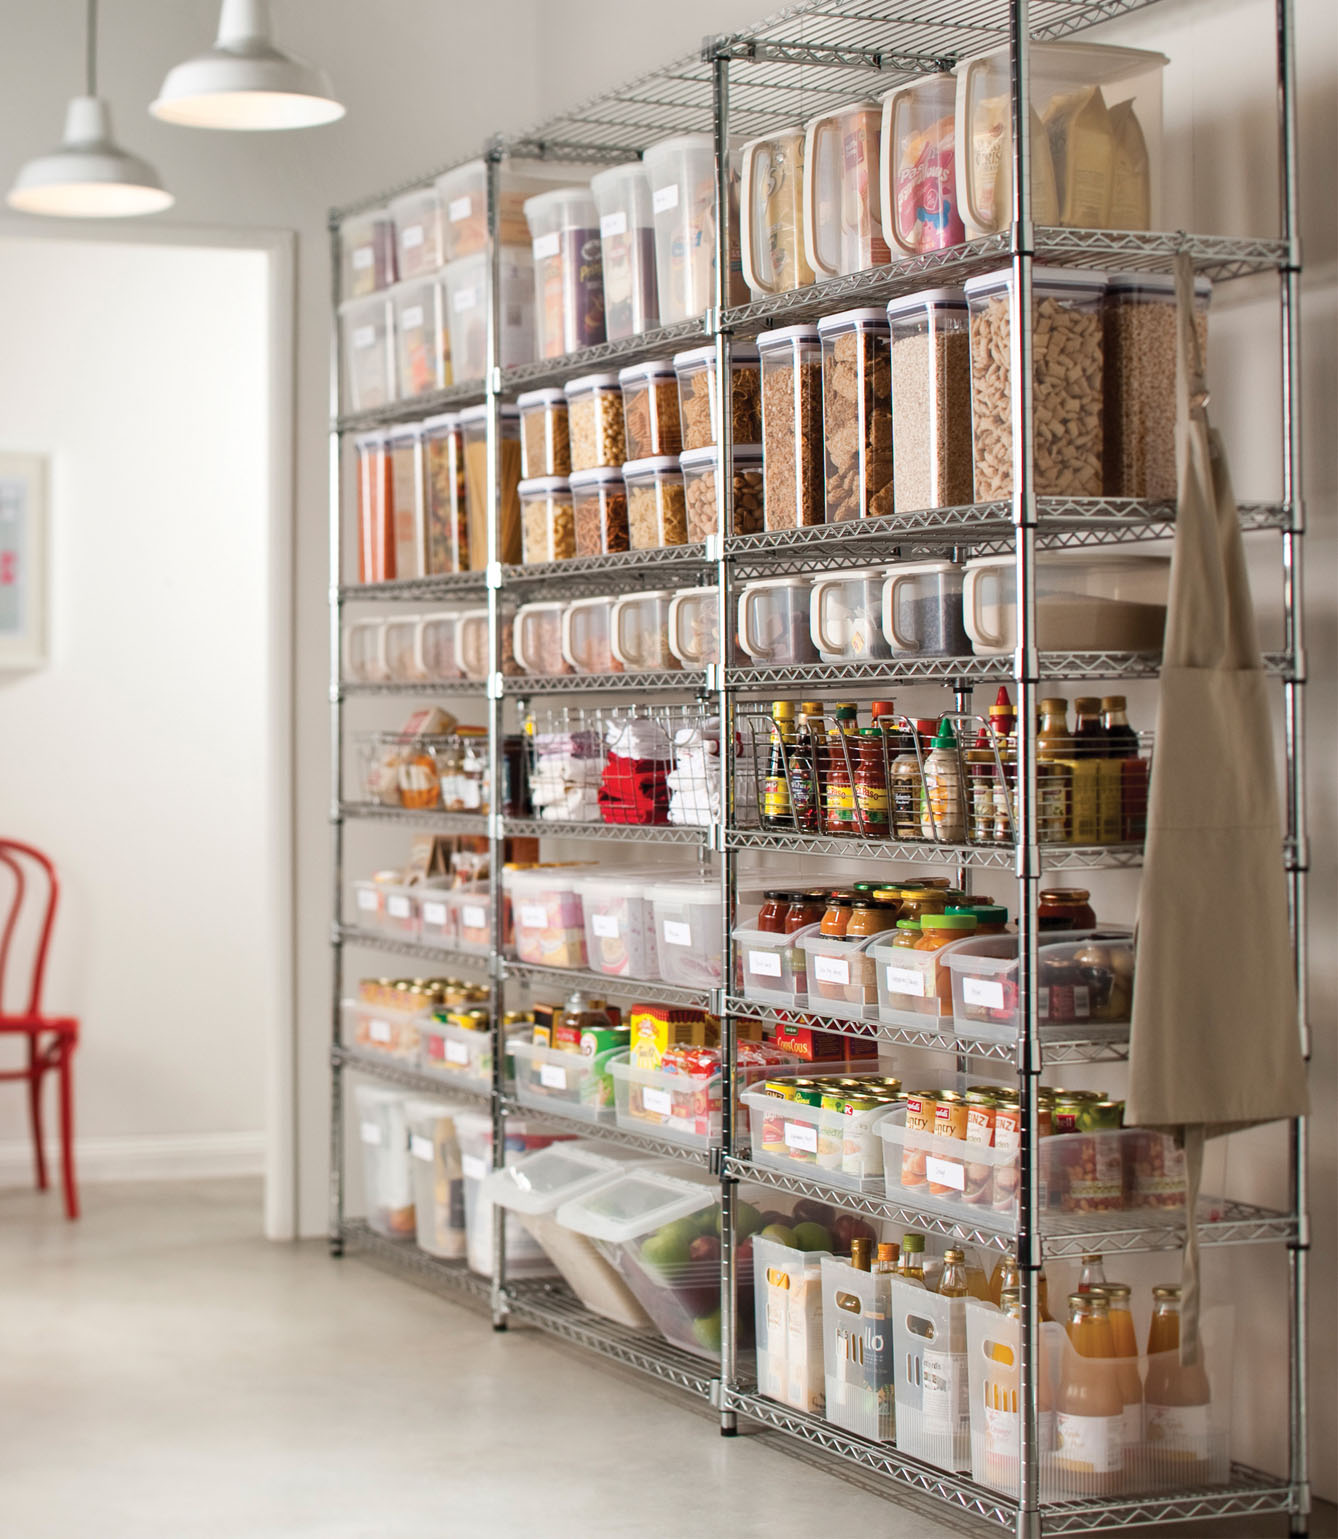 Metal shelving units are perfect to organize your food supplies